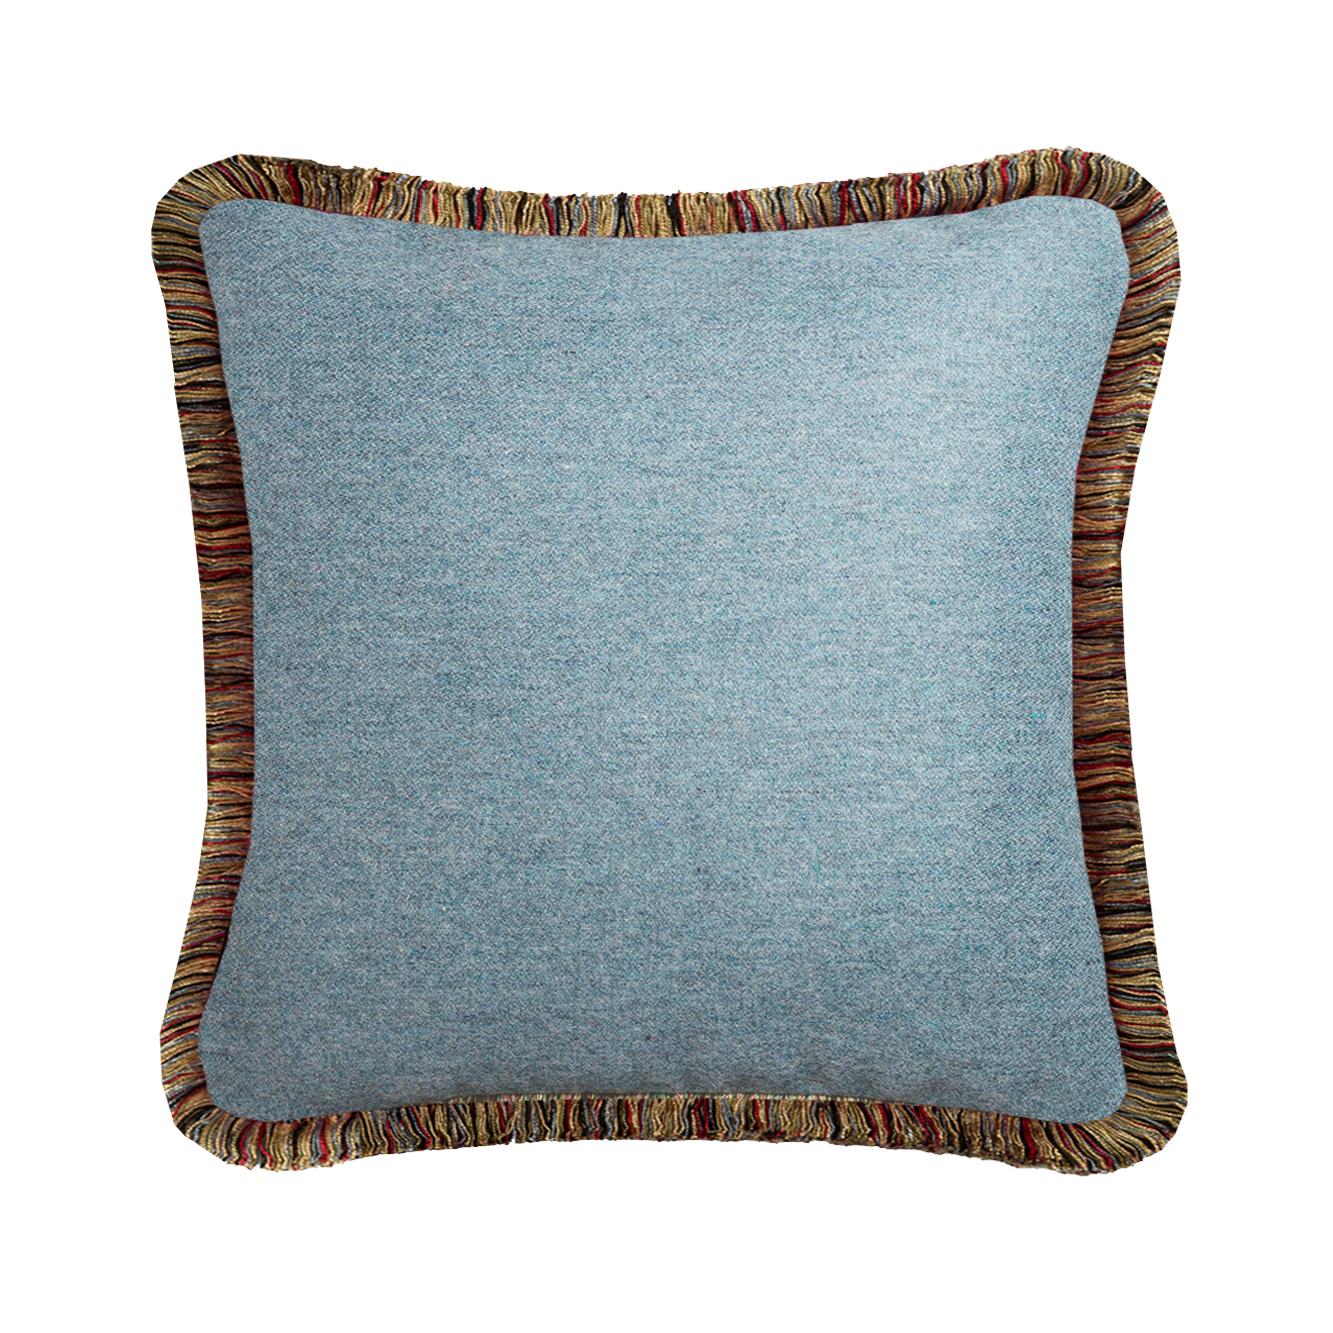 Hand-Crafted Happy Pillow MONGOLIA Wool Cushion Grey With Multicolor Fringes For Sale